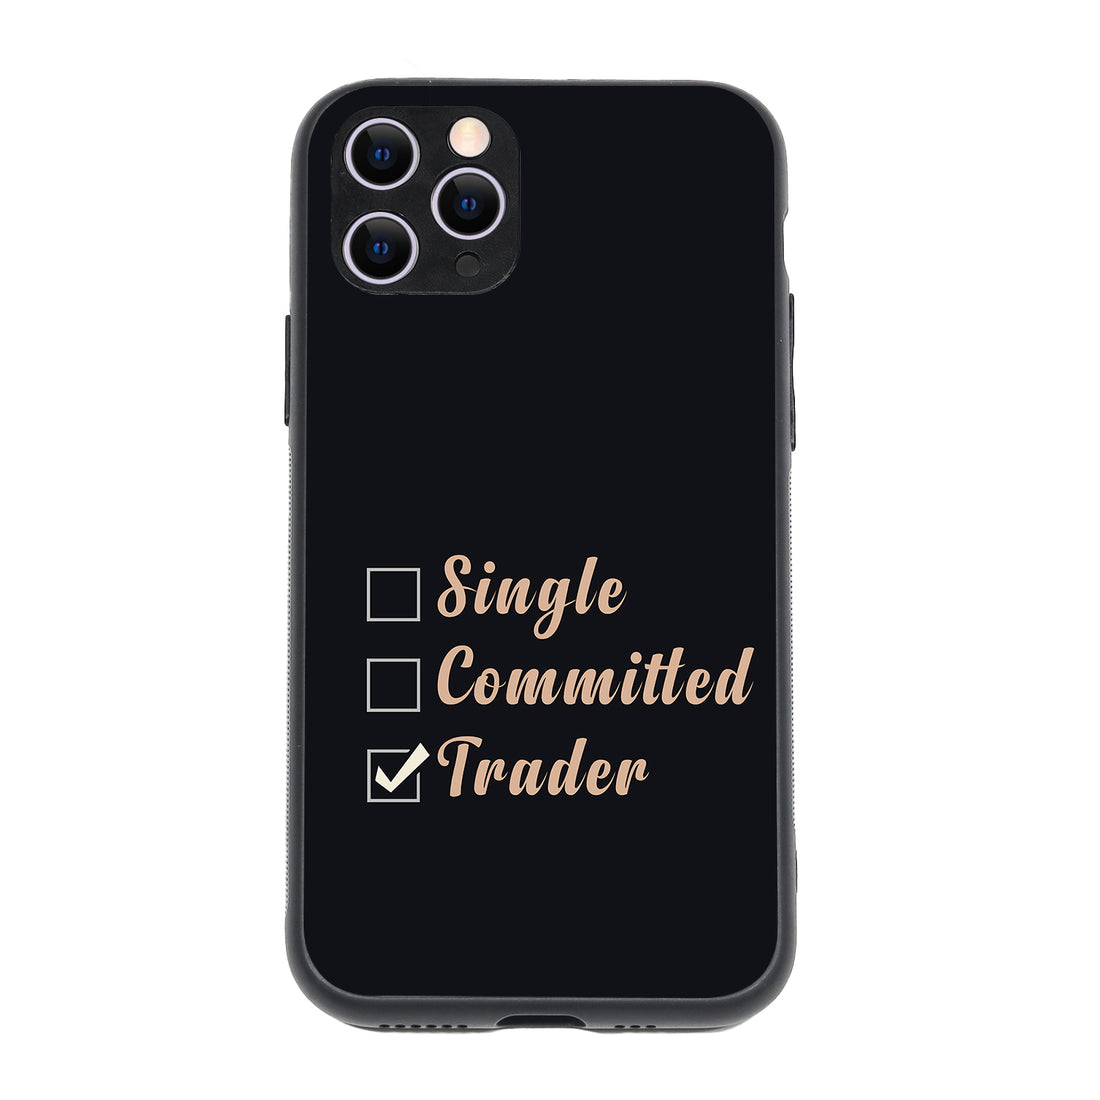 Single, Commited, Trader Trading iPhone 11 Pro Case